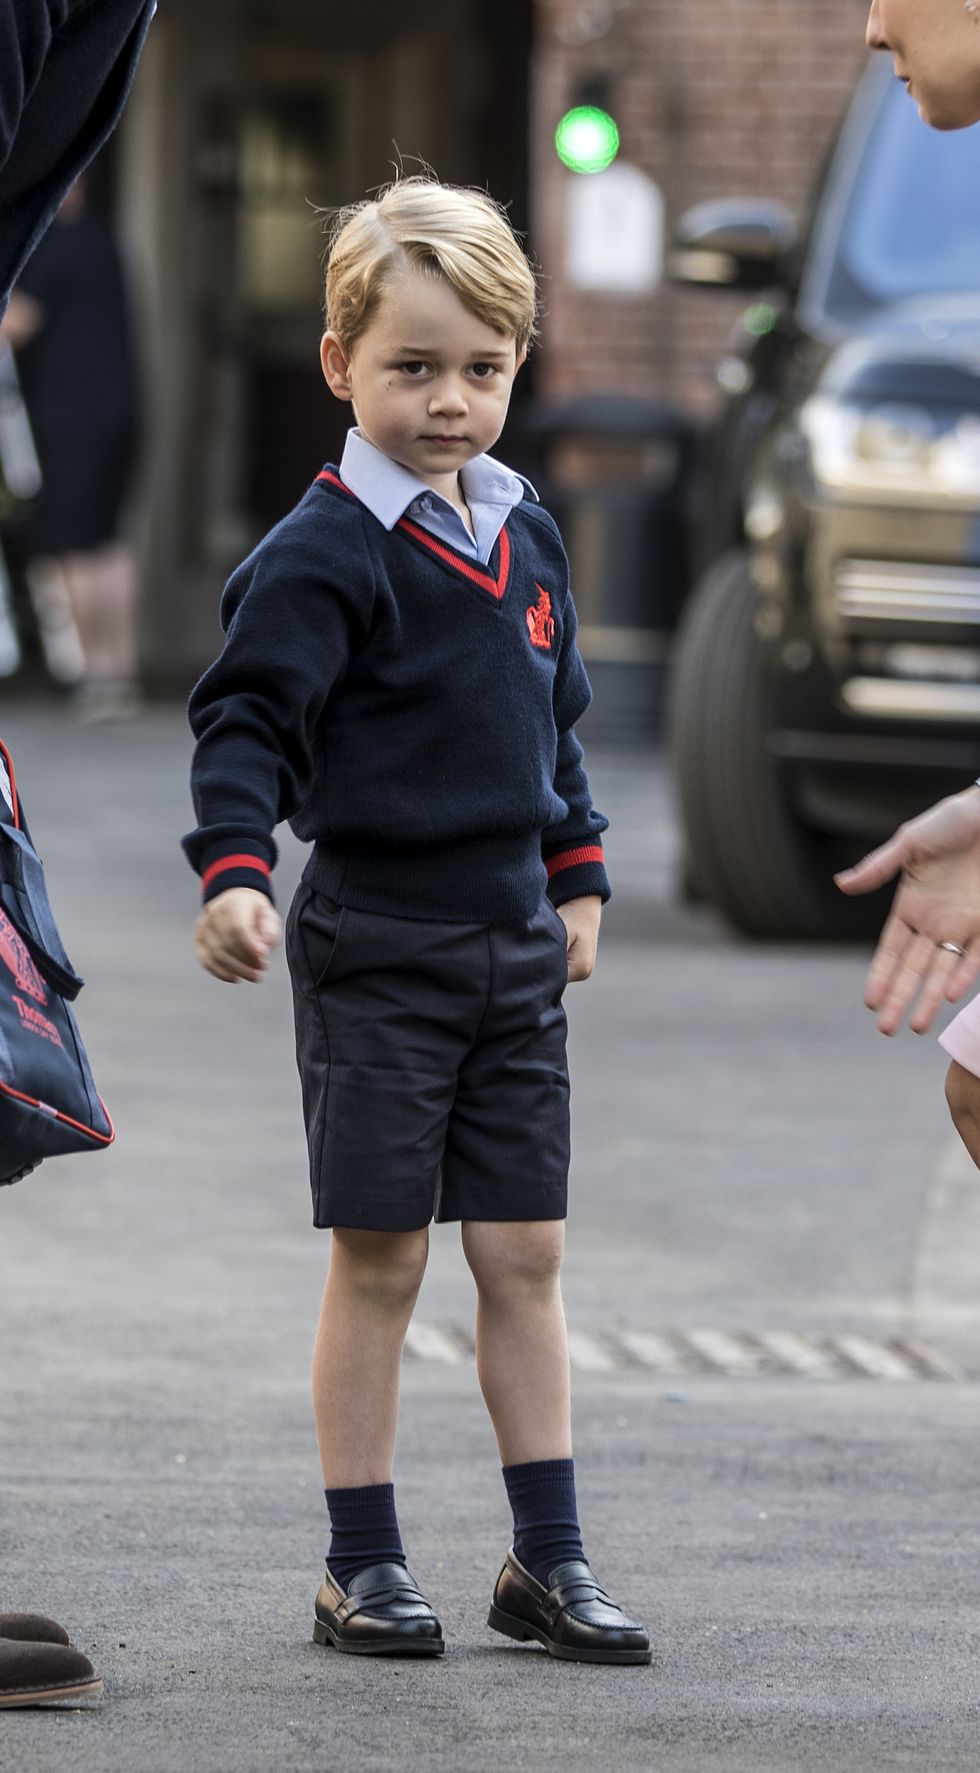 LONDON, ENGLAND - SEPTEMBER 7: Prince George of Cambridge arrives for his first day of school at Thomas's Battersea on September 7, 2017 in London, England. (Photo by Richard Pohle - WPA Pool/Getty Images)